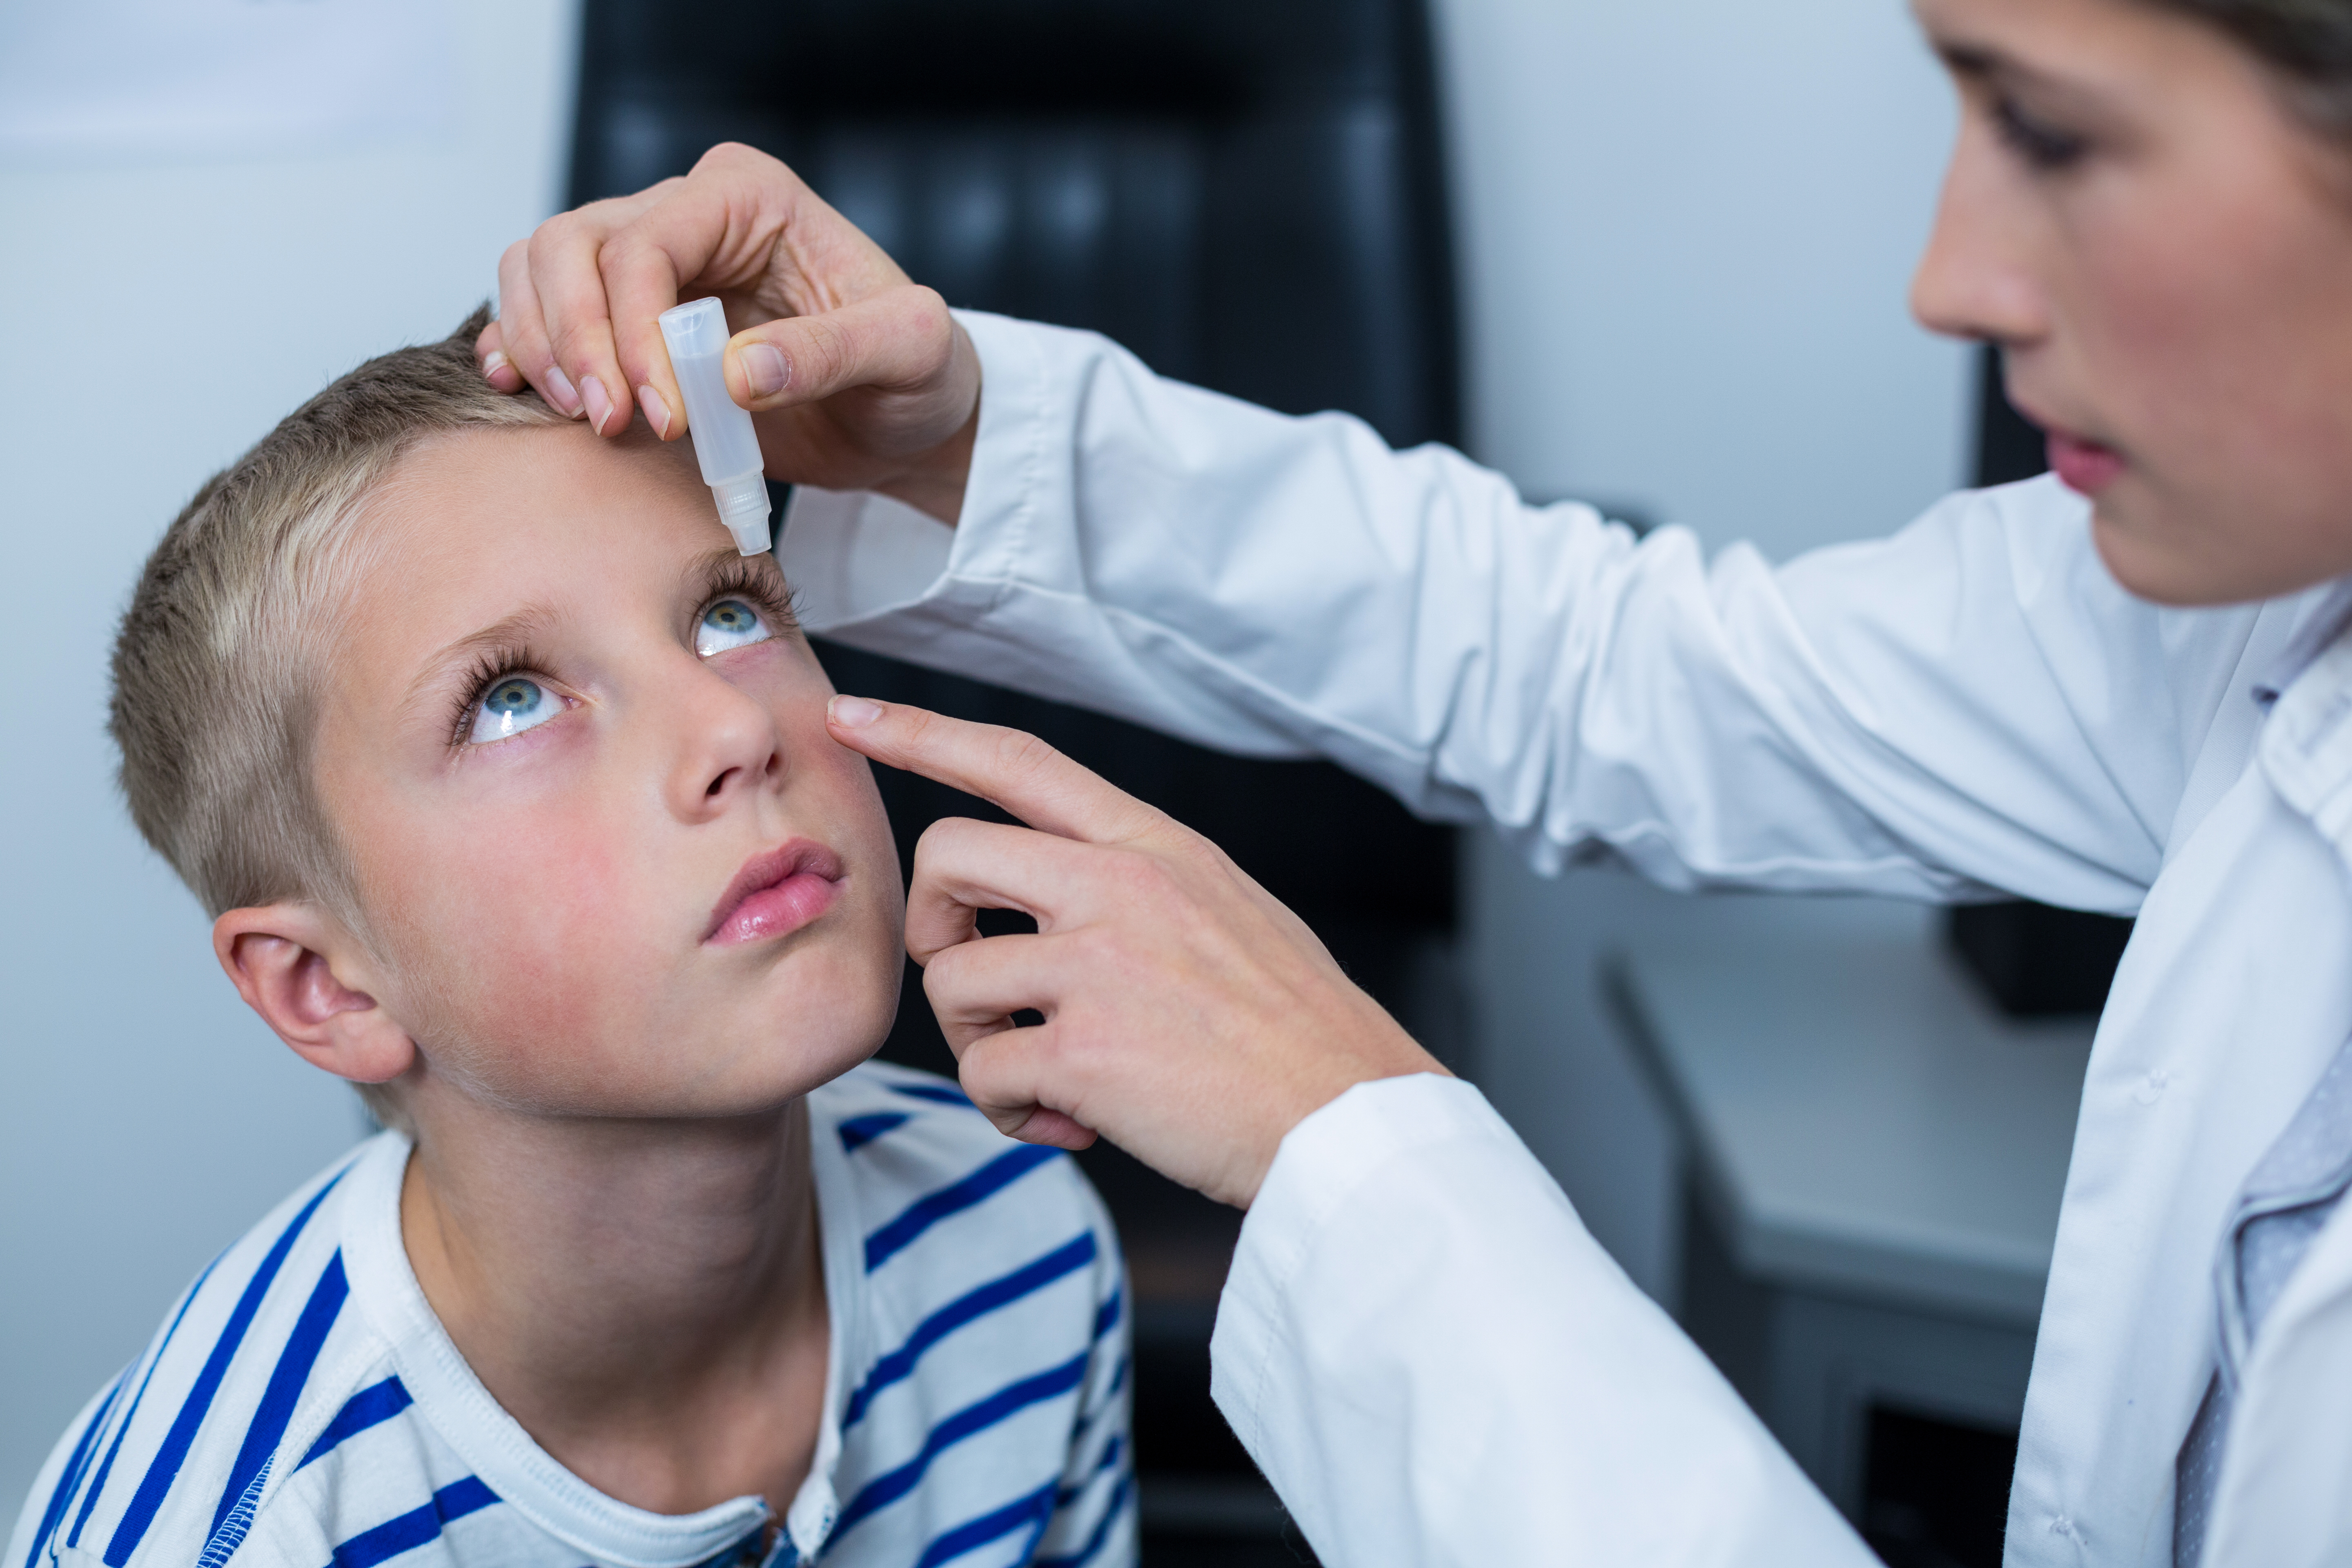 Study shows 0.005% and 0.01% atropine doses effectively reduced myopia progression in children aged six to 11 with mild to moderate disease.